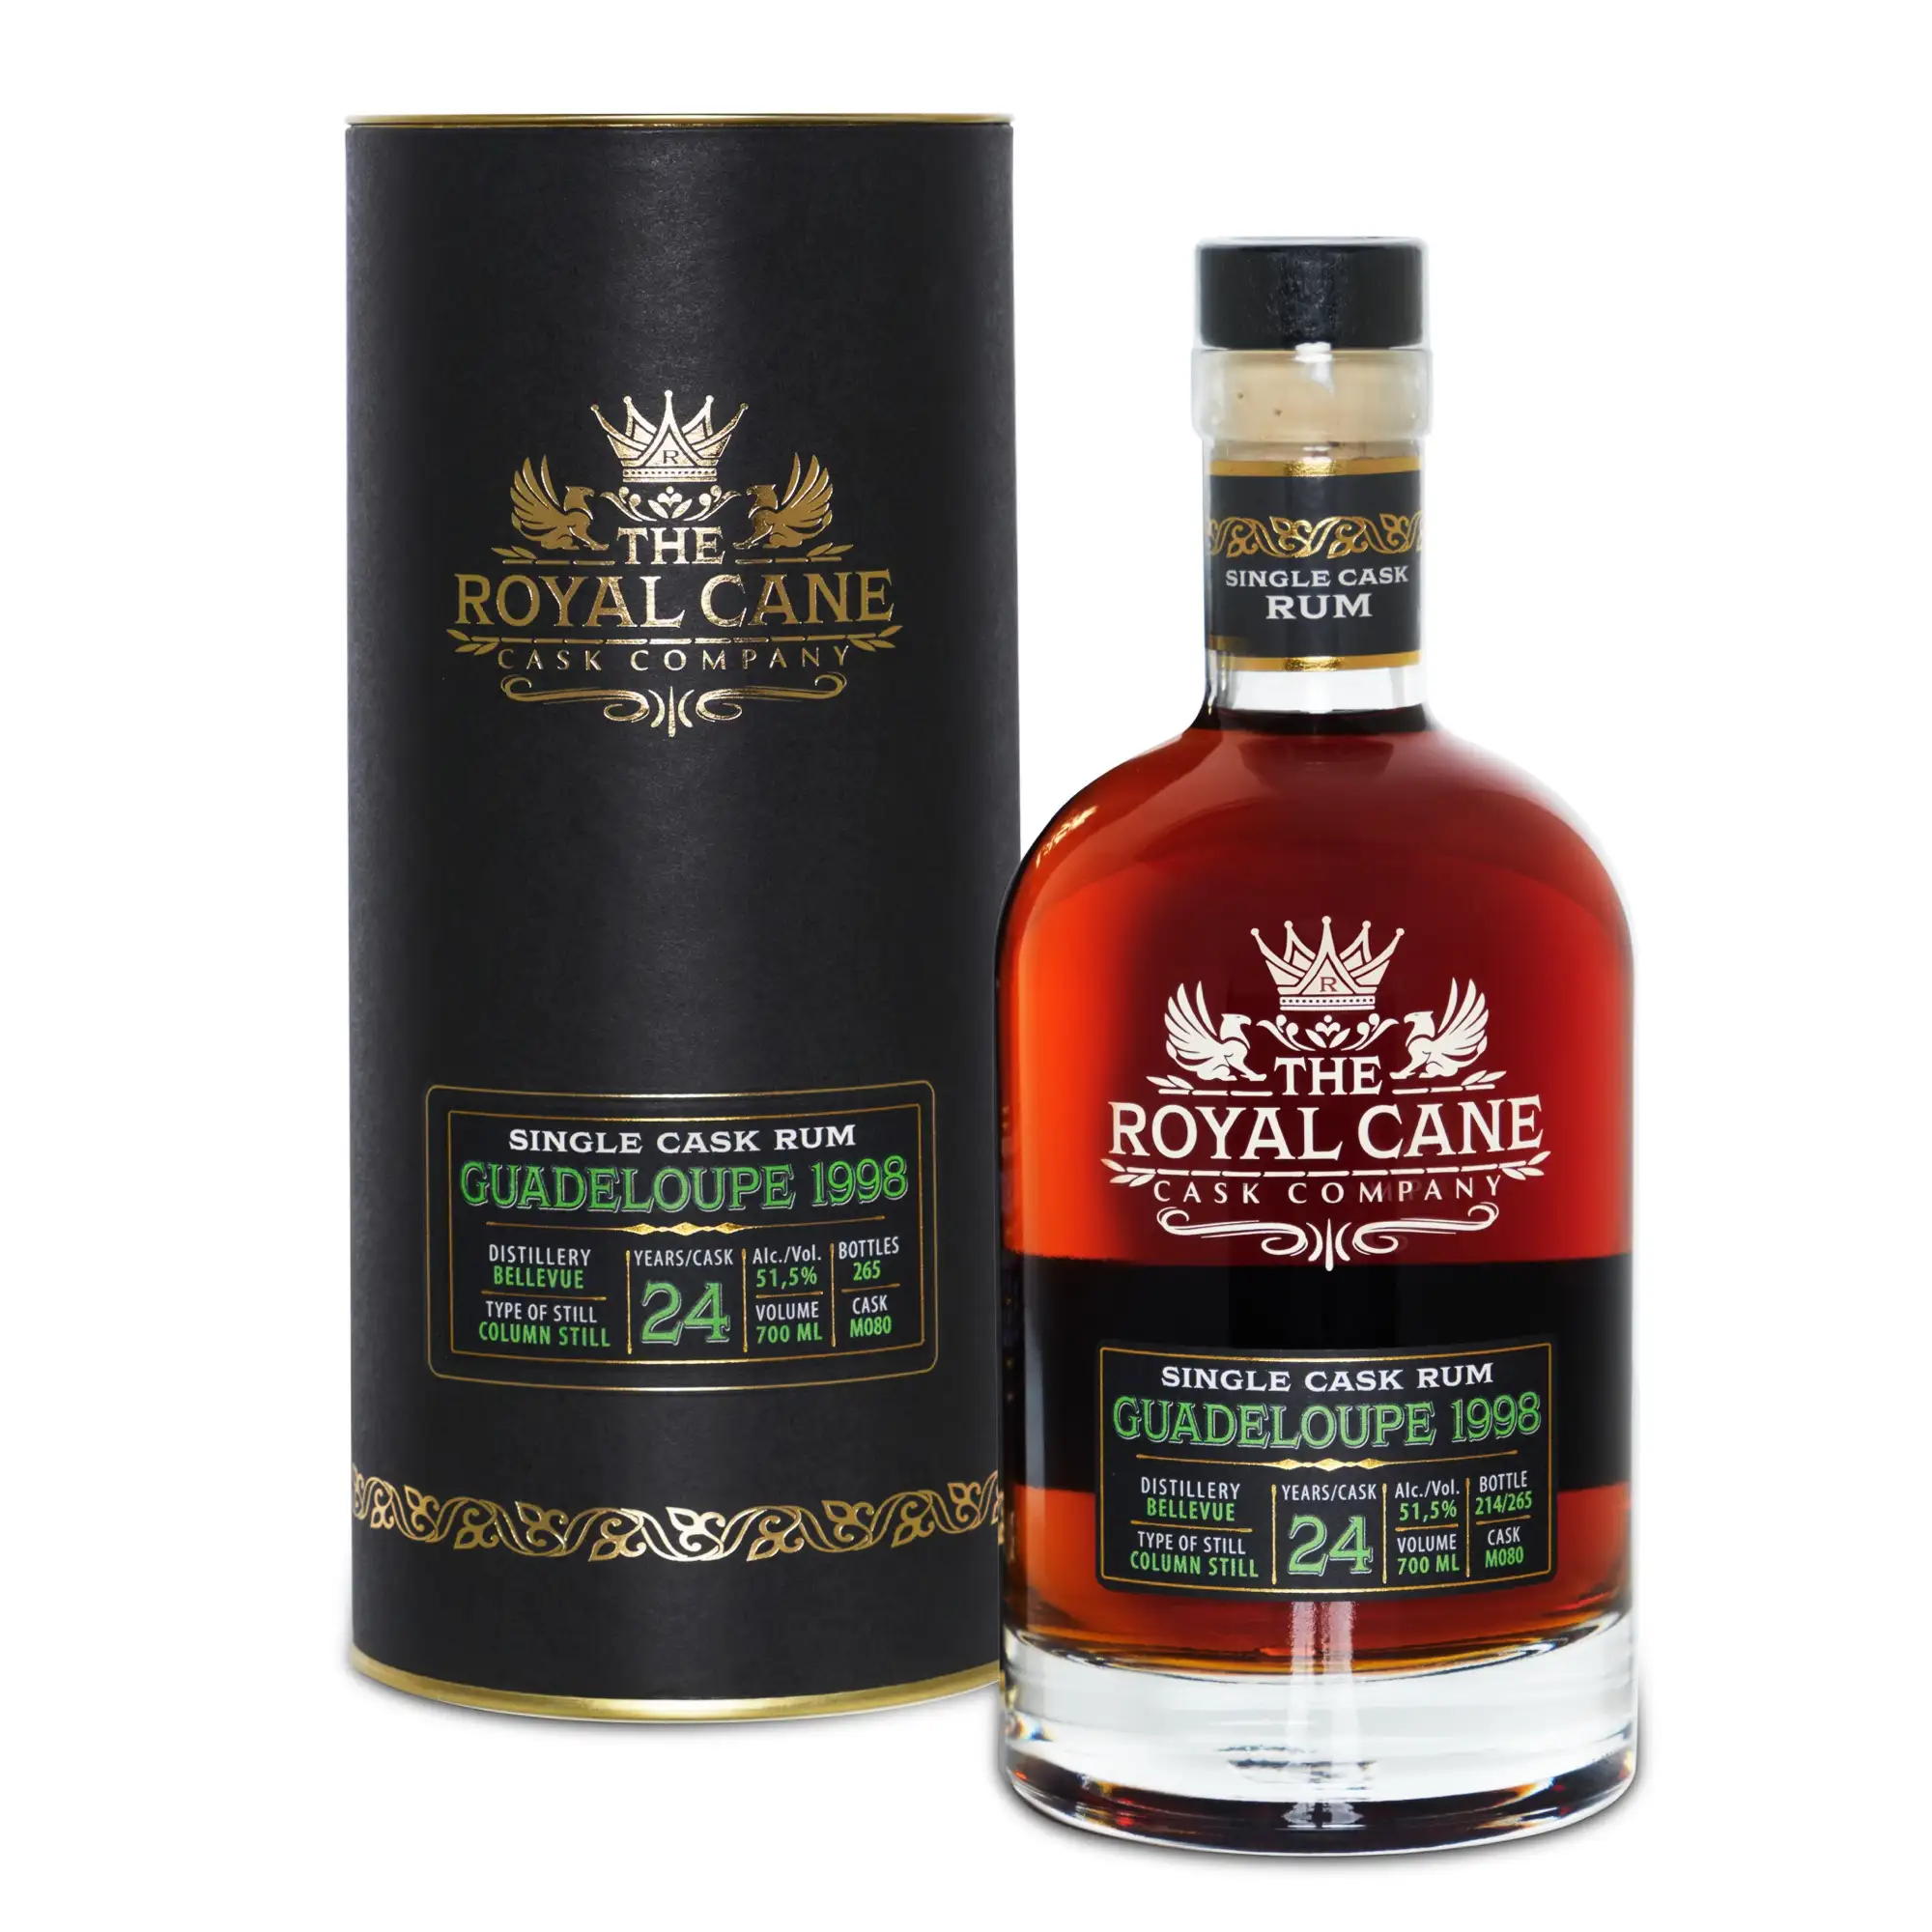 Image of the front of the bottle of the rum The Royal Cane Cask Company Guadeloupe